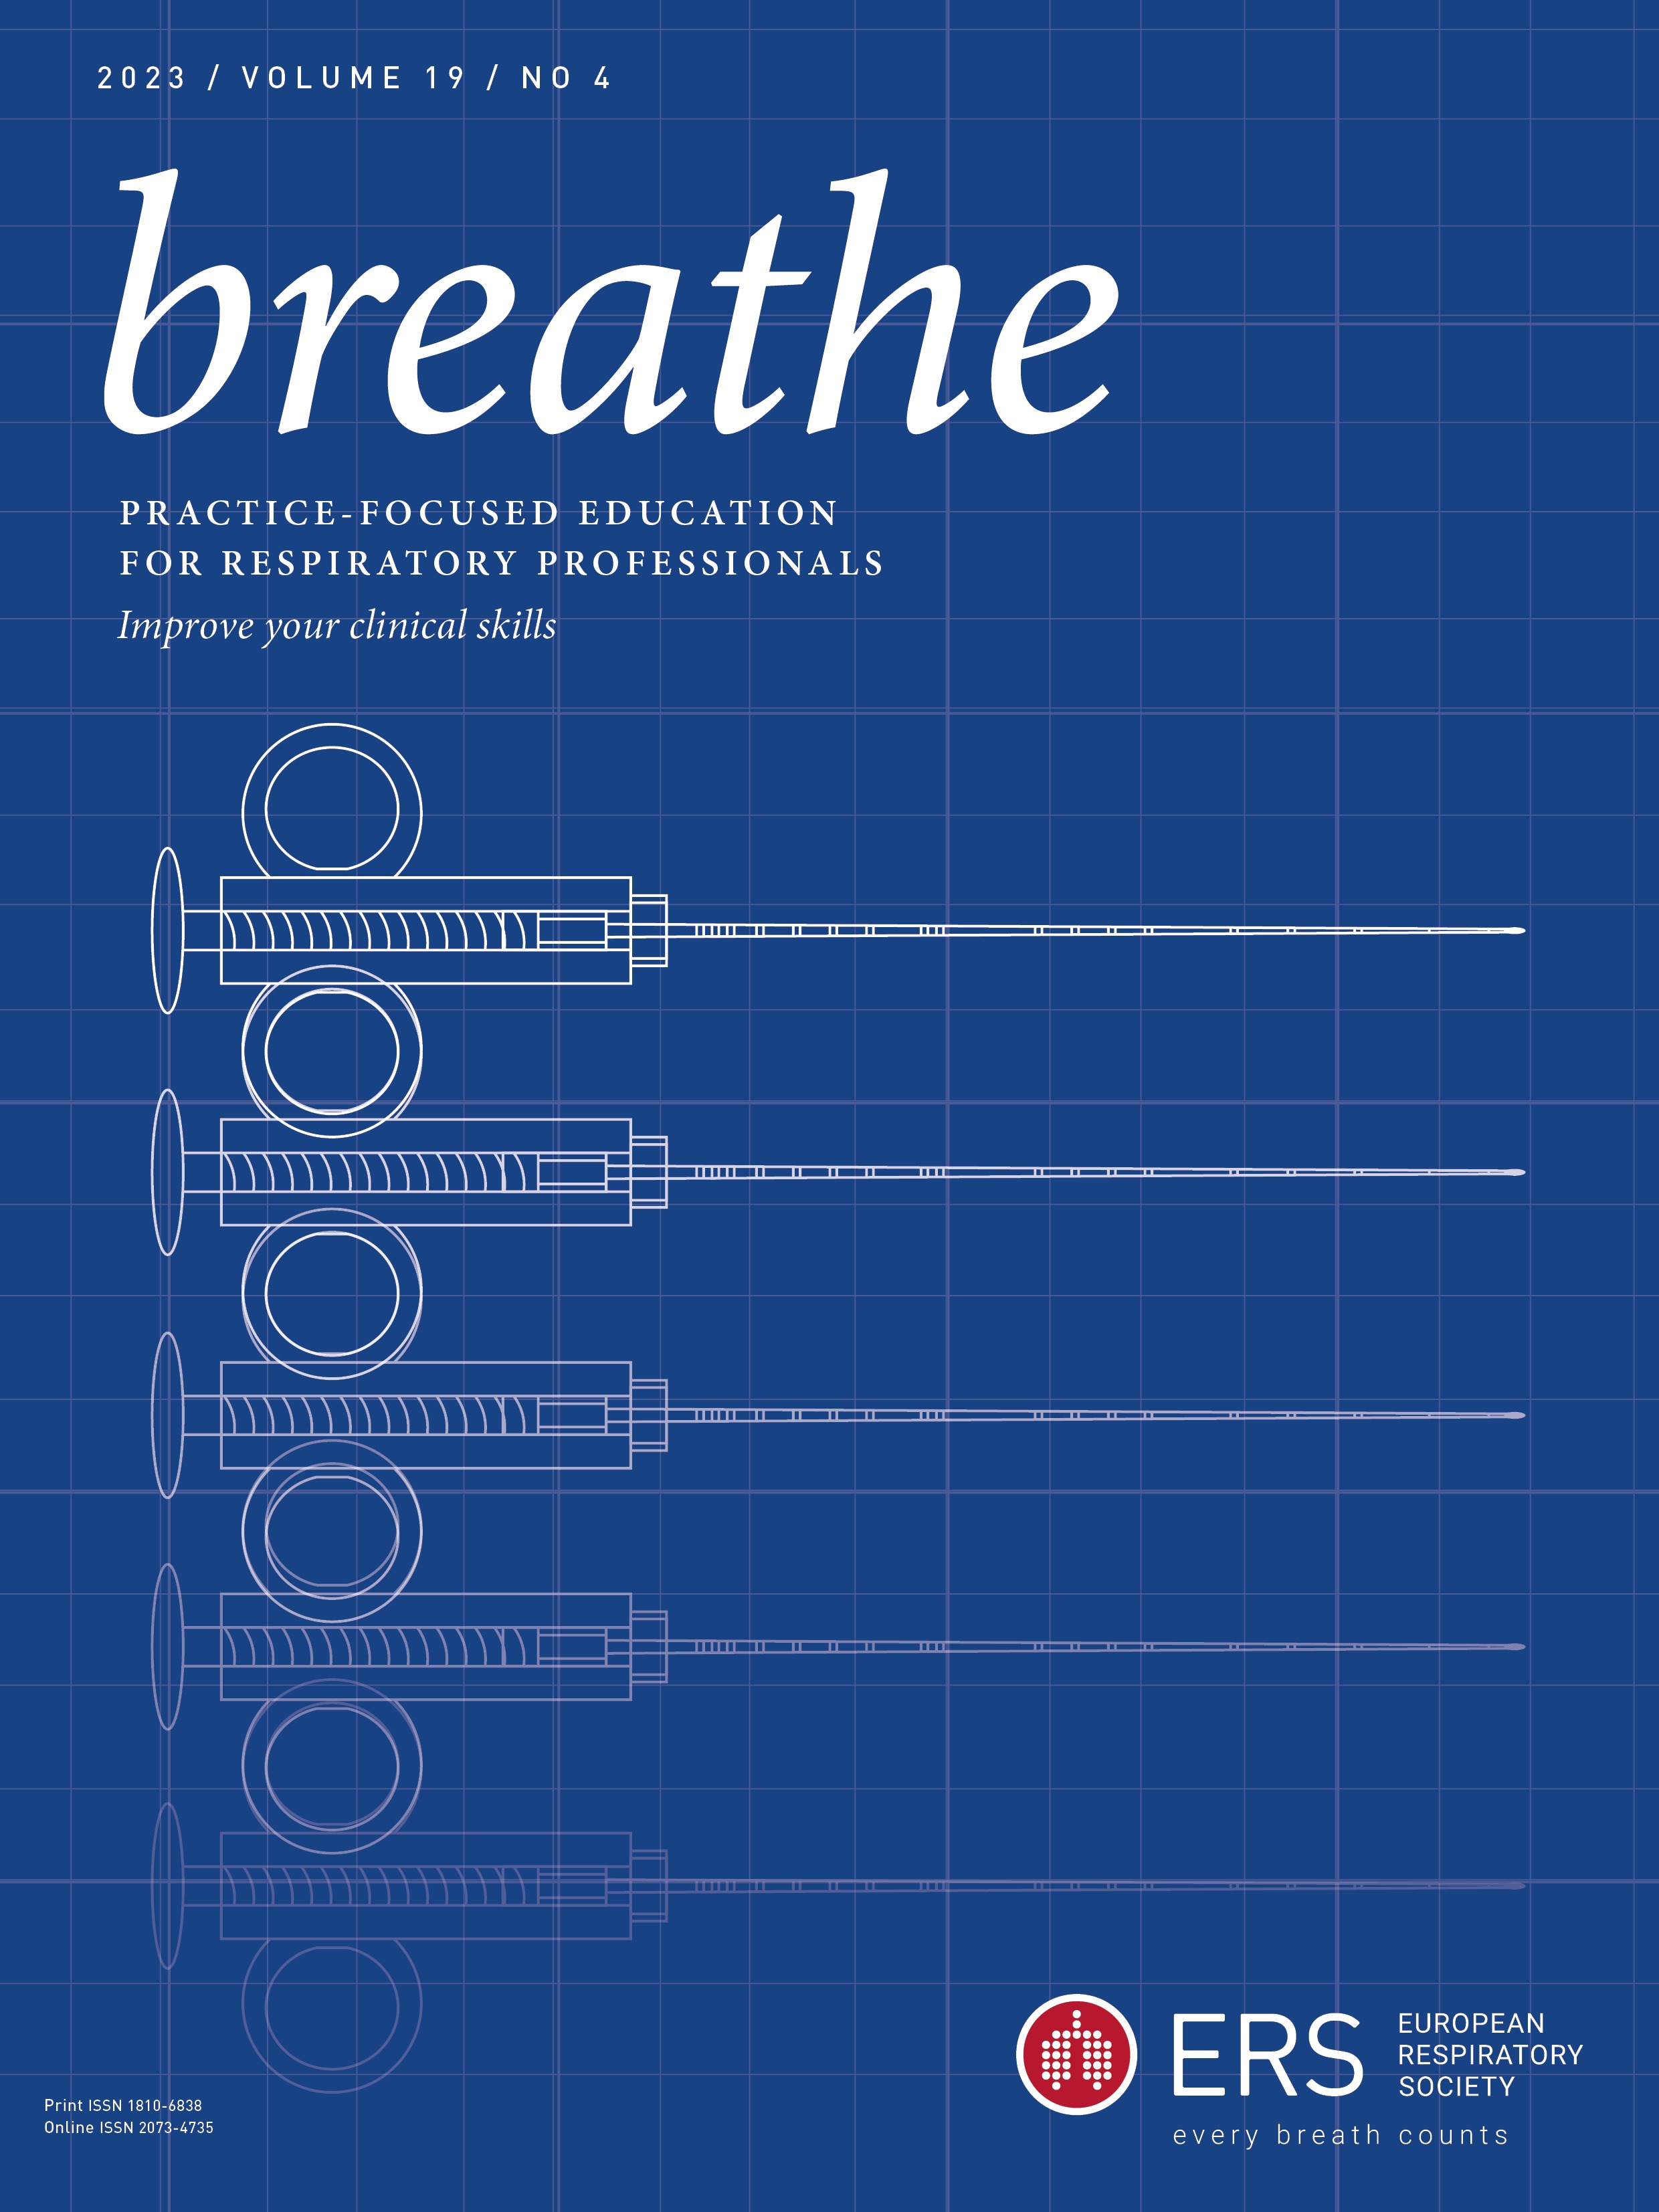 Patient experience: impact of environmental conditions on severe asthma